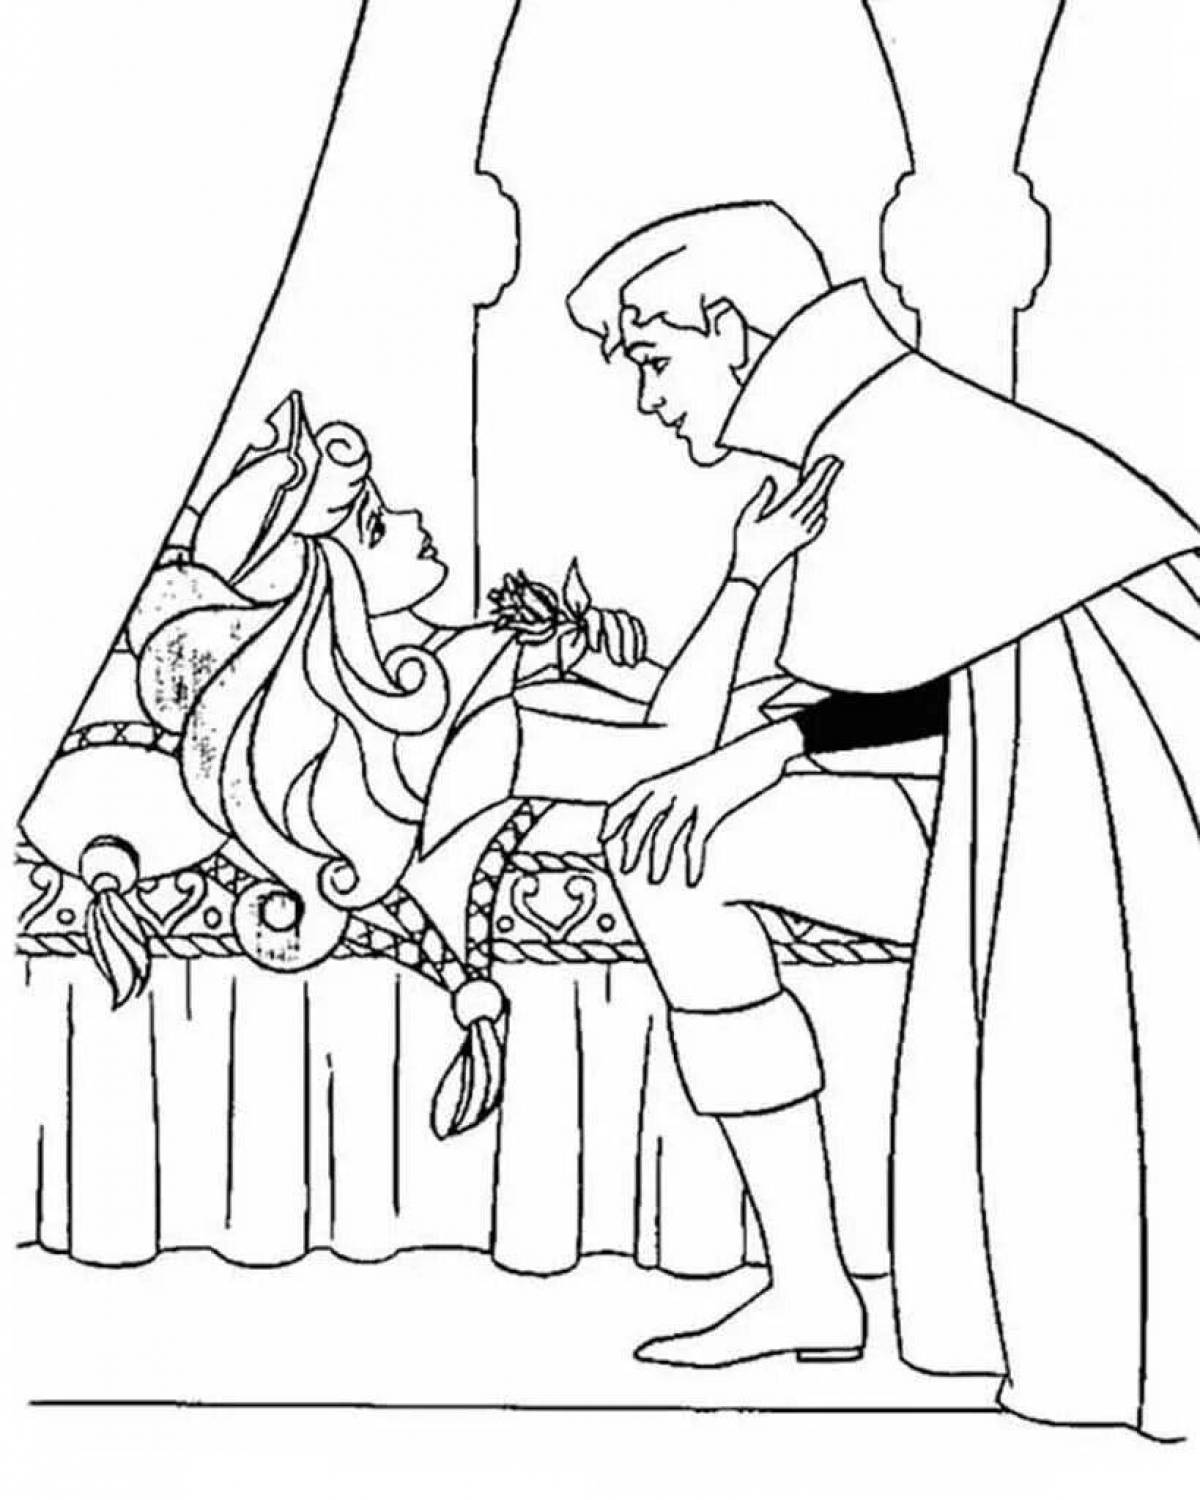 Great sleeping beauty coloring book for kids